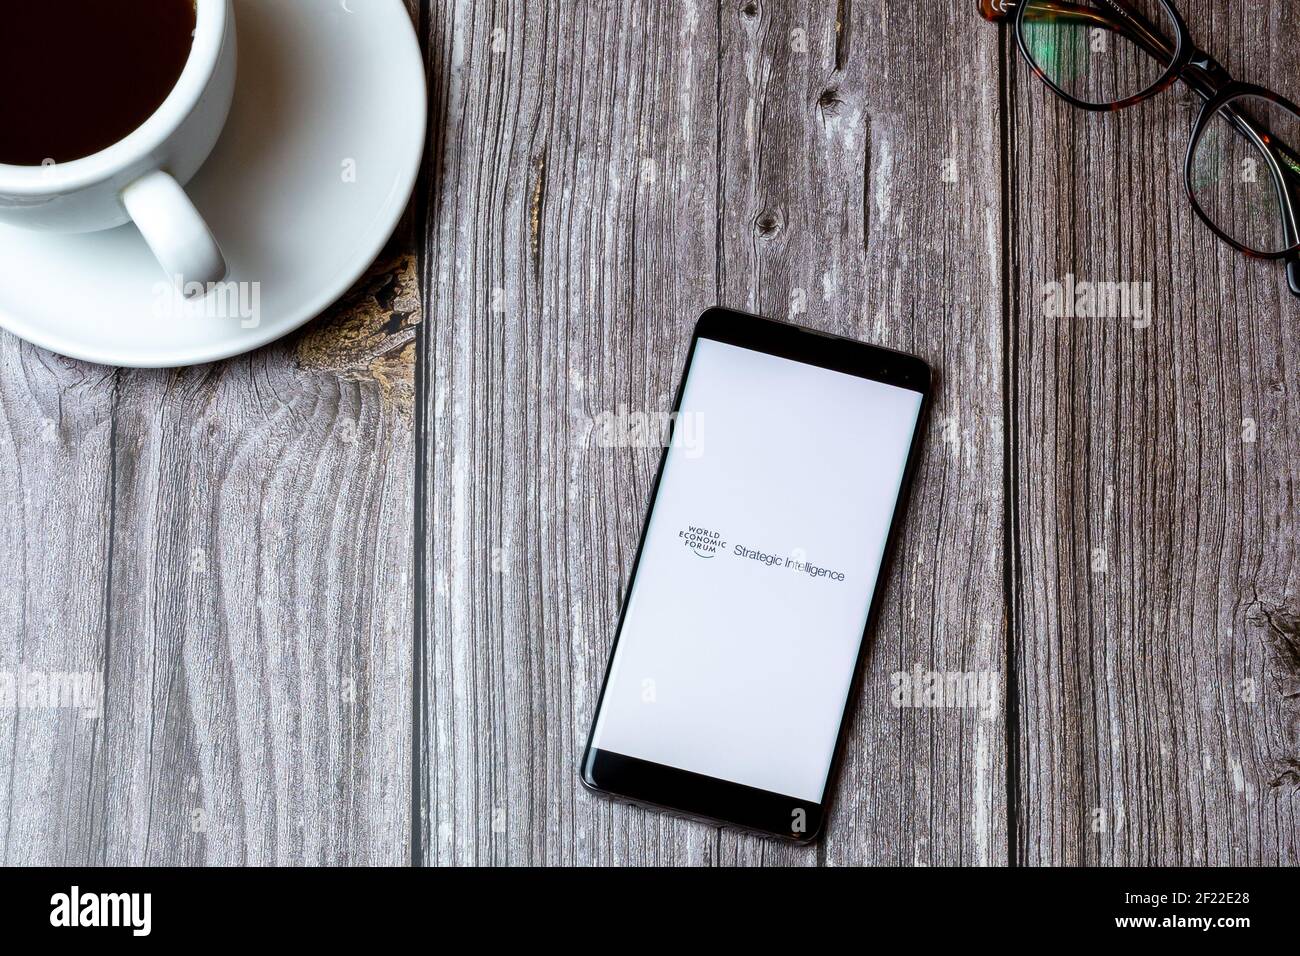 A mobile phone or cell phone laid on a wooden table with the World economic forum app open on screen Stock Photo